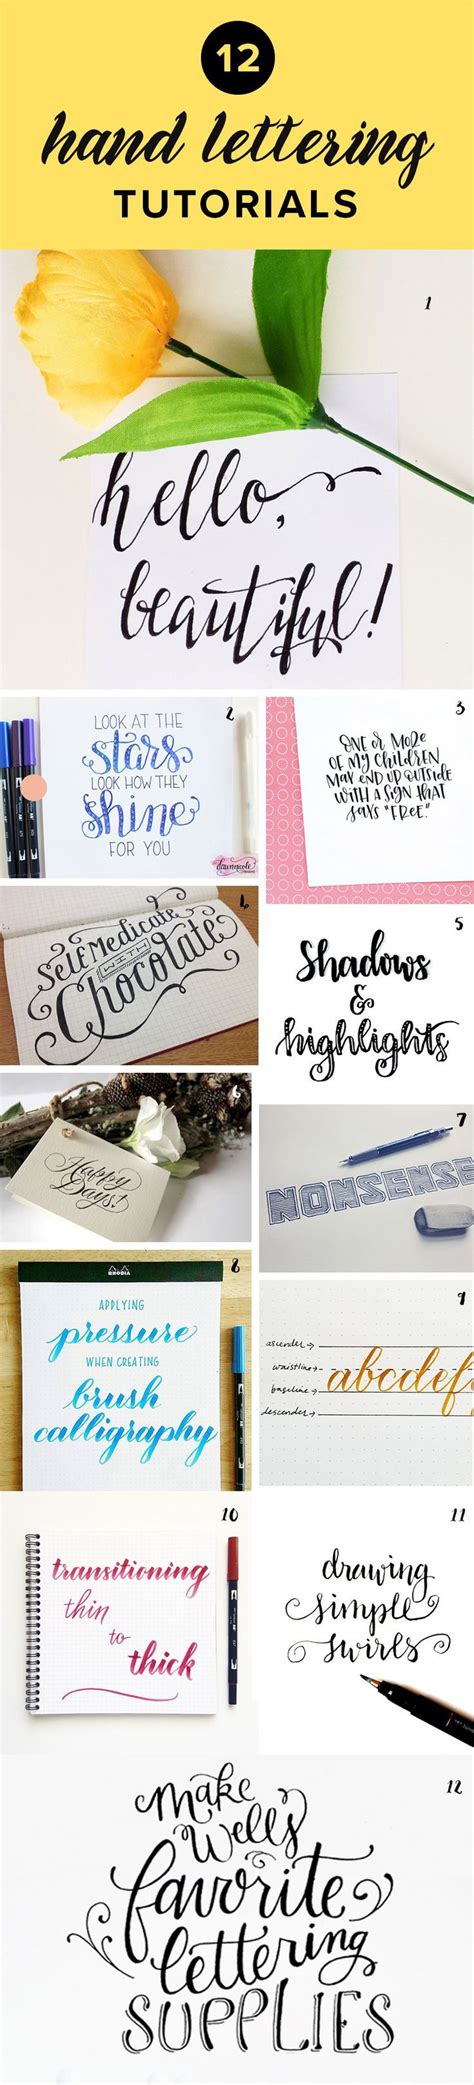 24 Awesome Hand Lettering Tutorials Hand Lettering Tutorial Learn